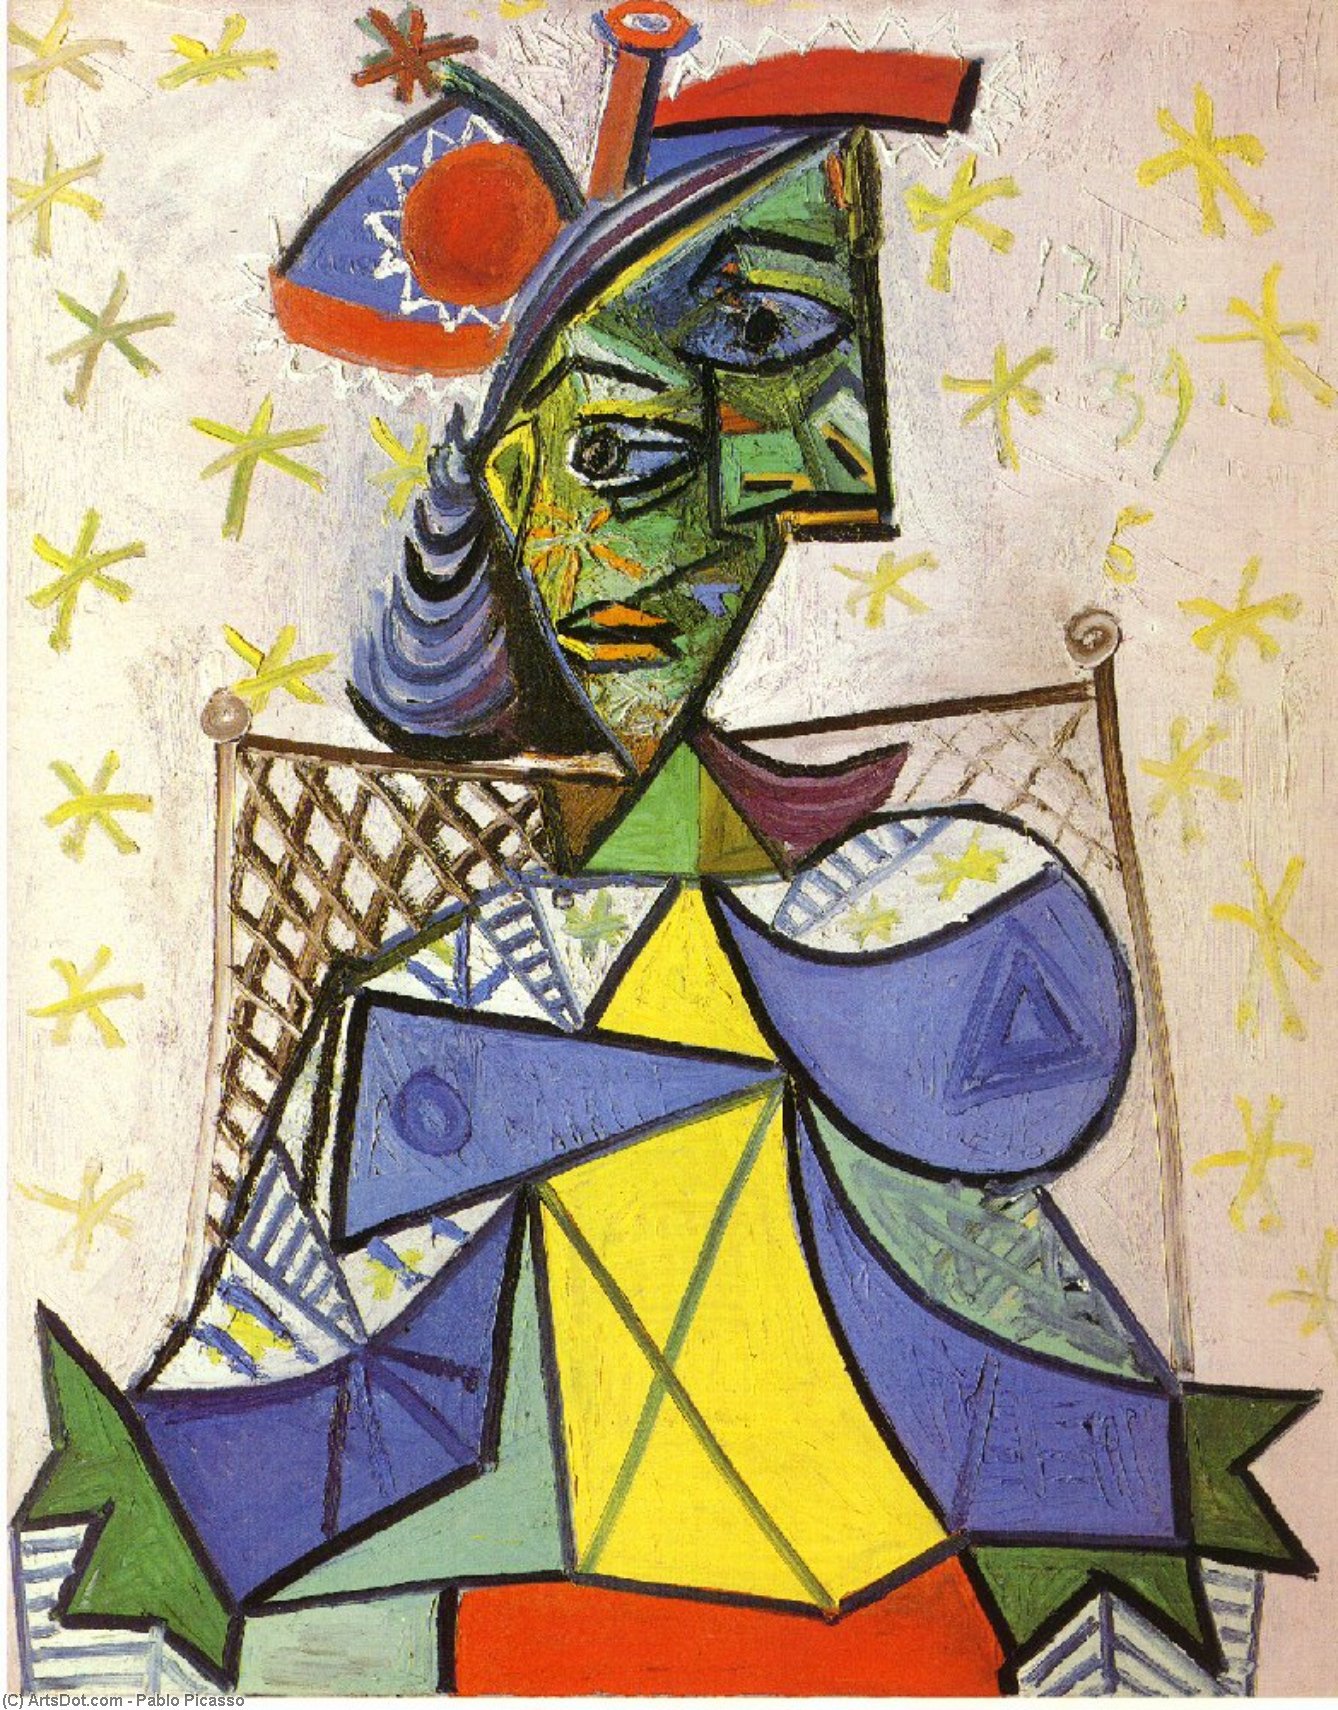 WikiOO.org - Güzel Sanatlar Ansiklopedisi - Resim, Resimler Pablo Picasso - Seated woman with blue and red hat